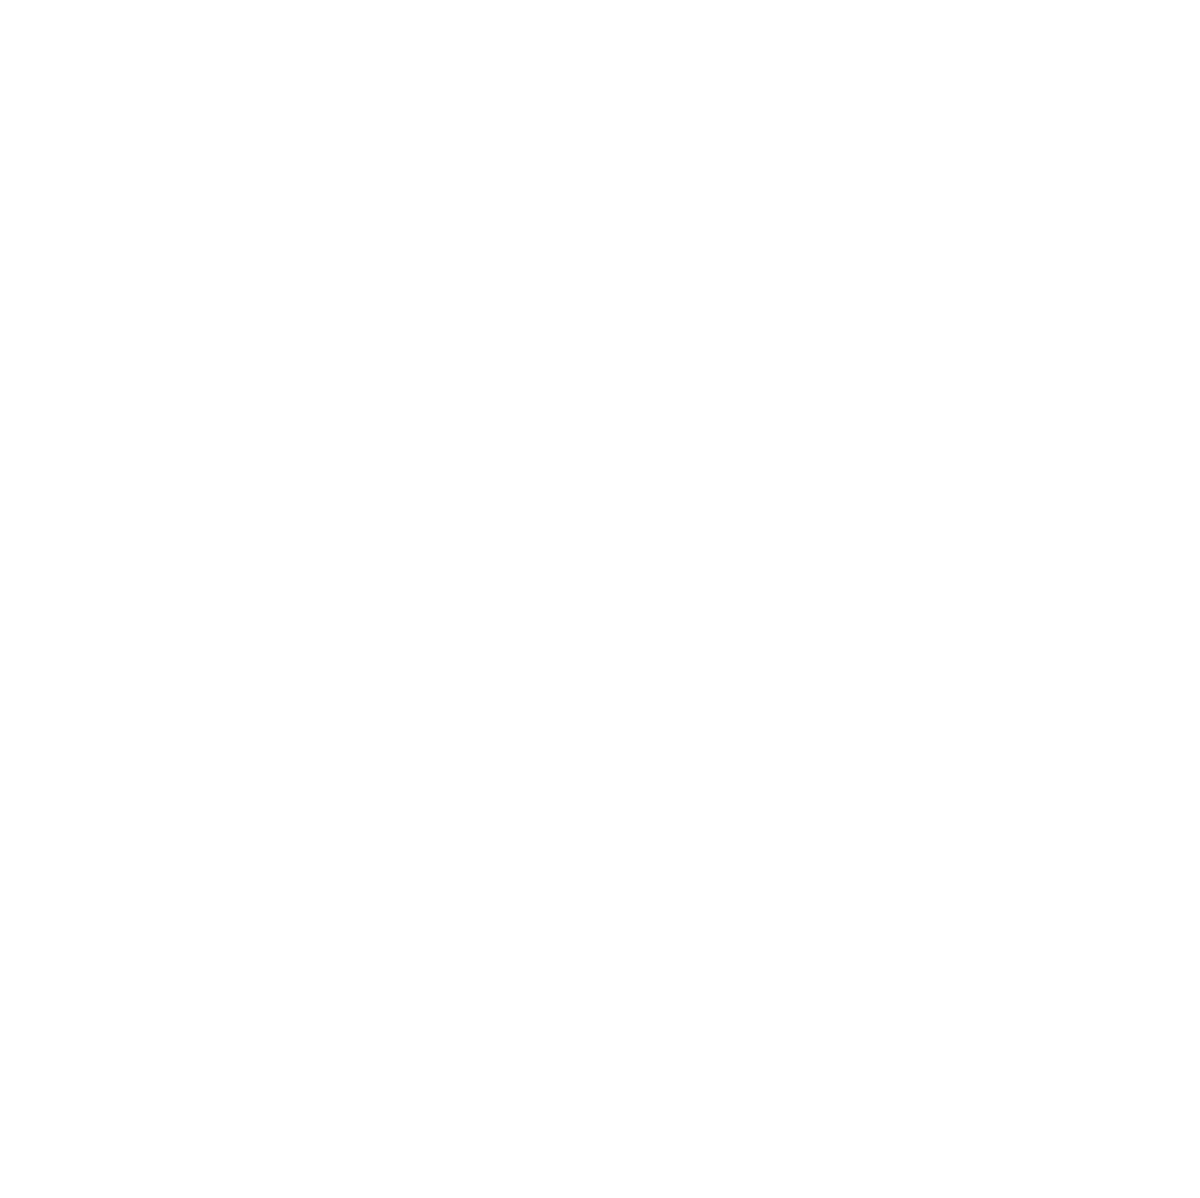 Daily Grill